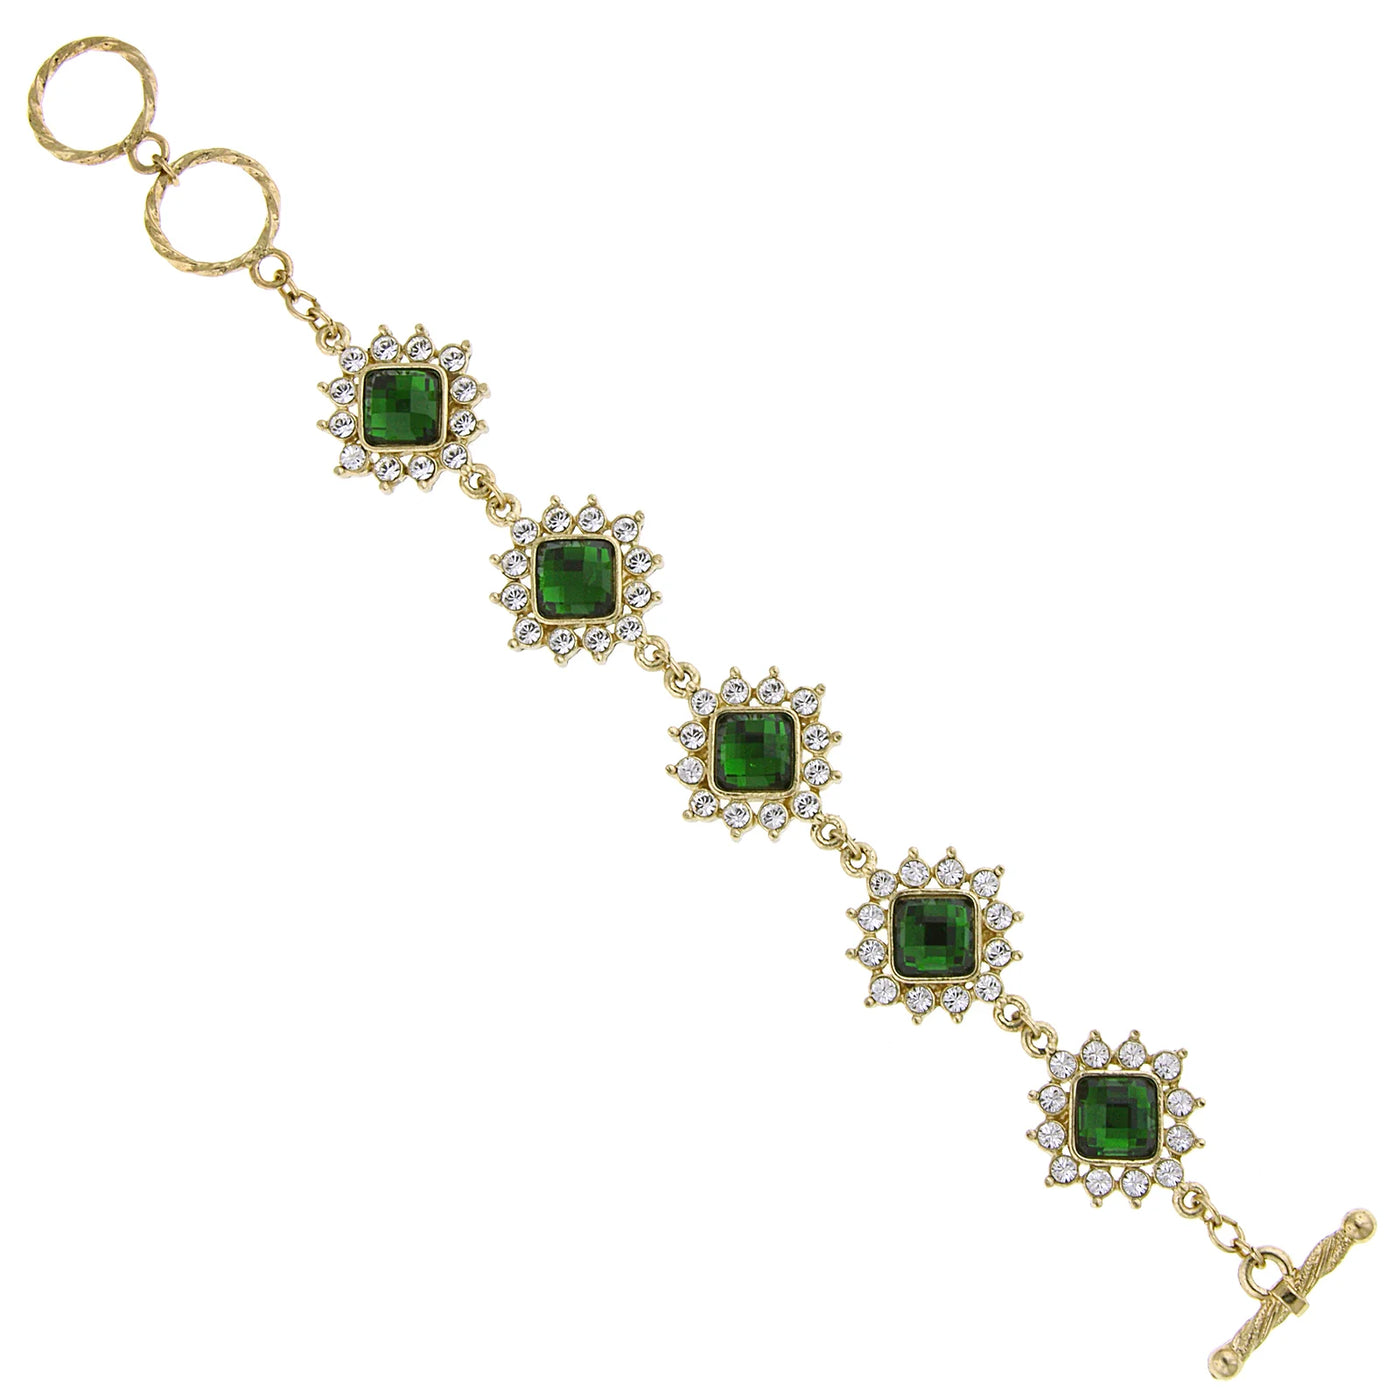 Green Stone And Crystal Toggle Bracelet